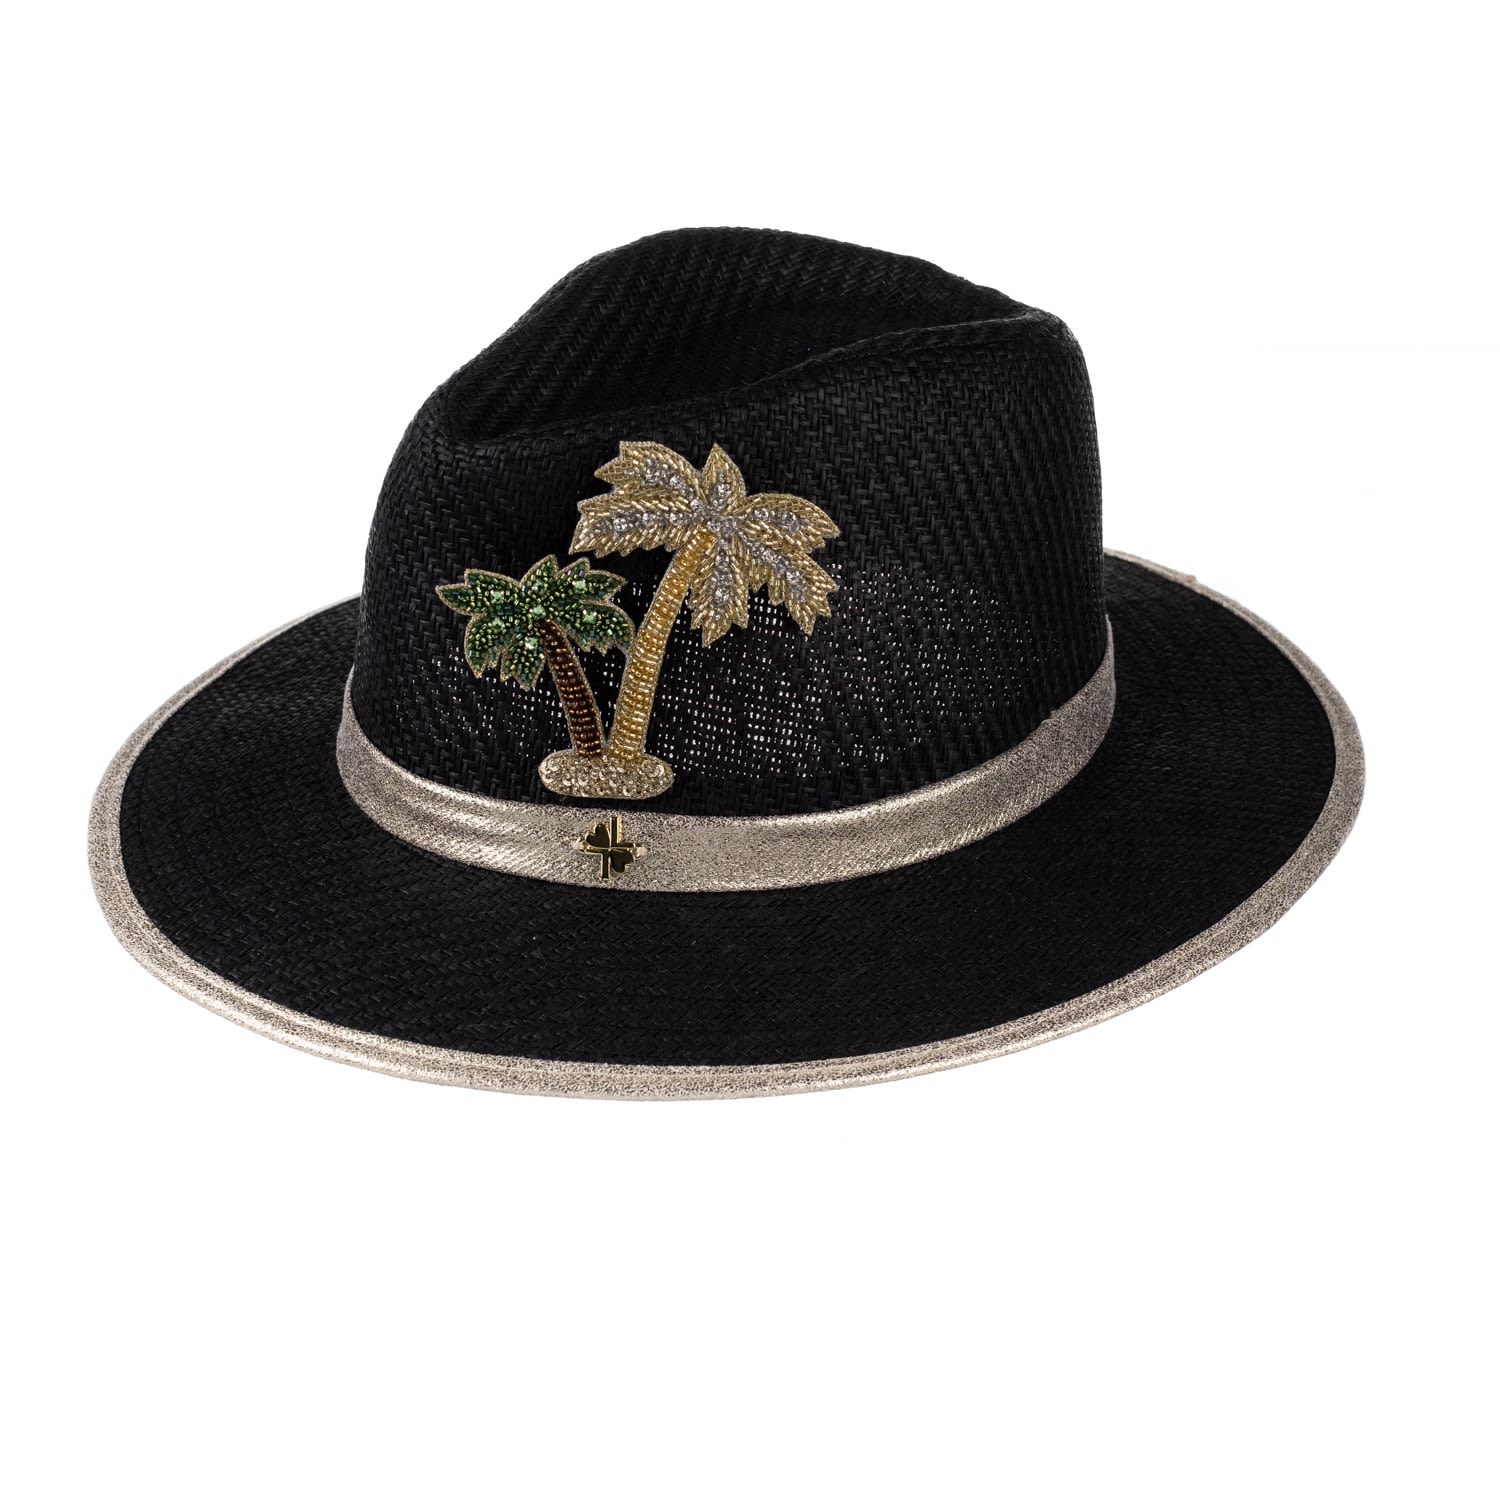 Laines London Women's Straw Woven Hat With Couture Embellished Golden Palm Tree Brooch - Black